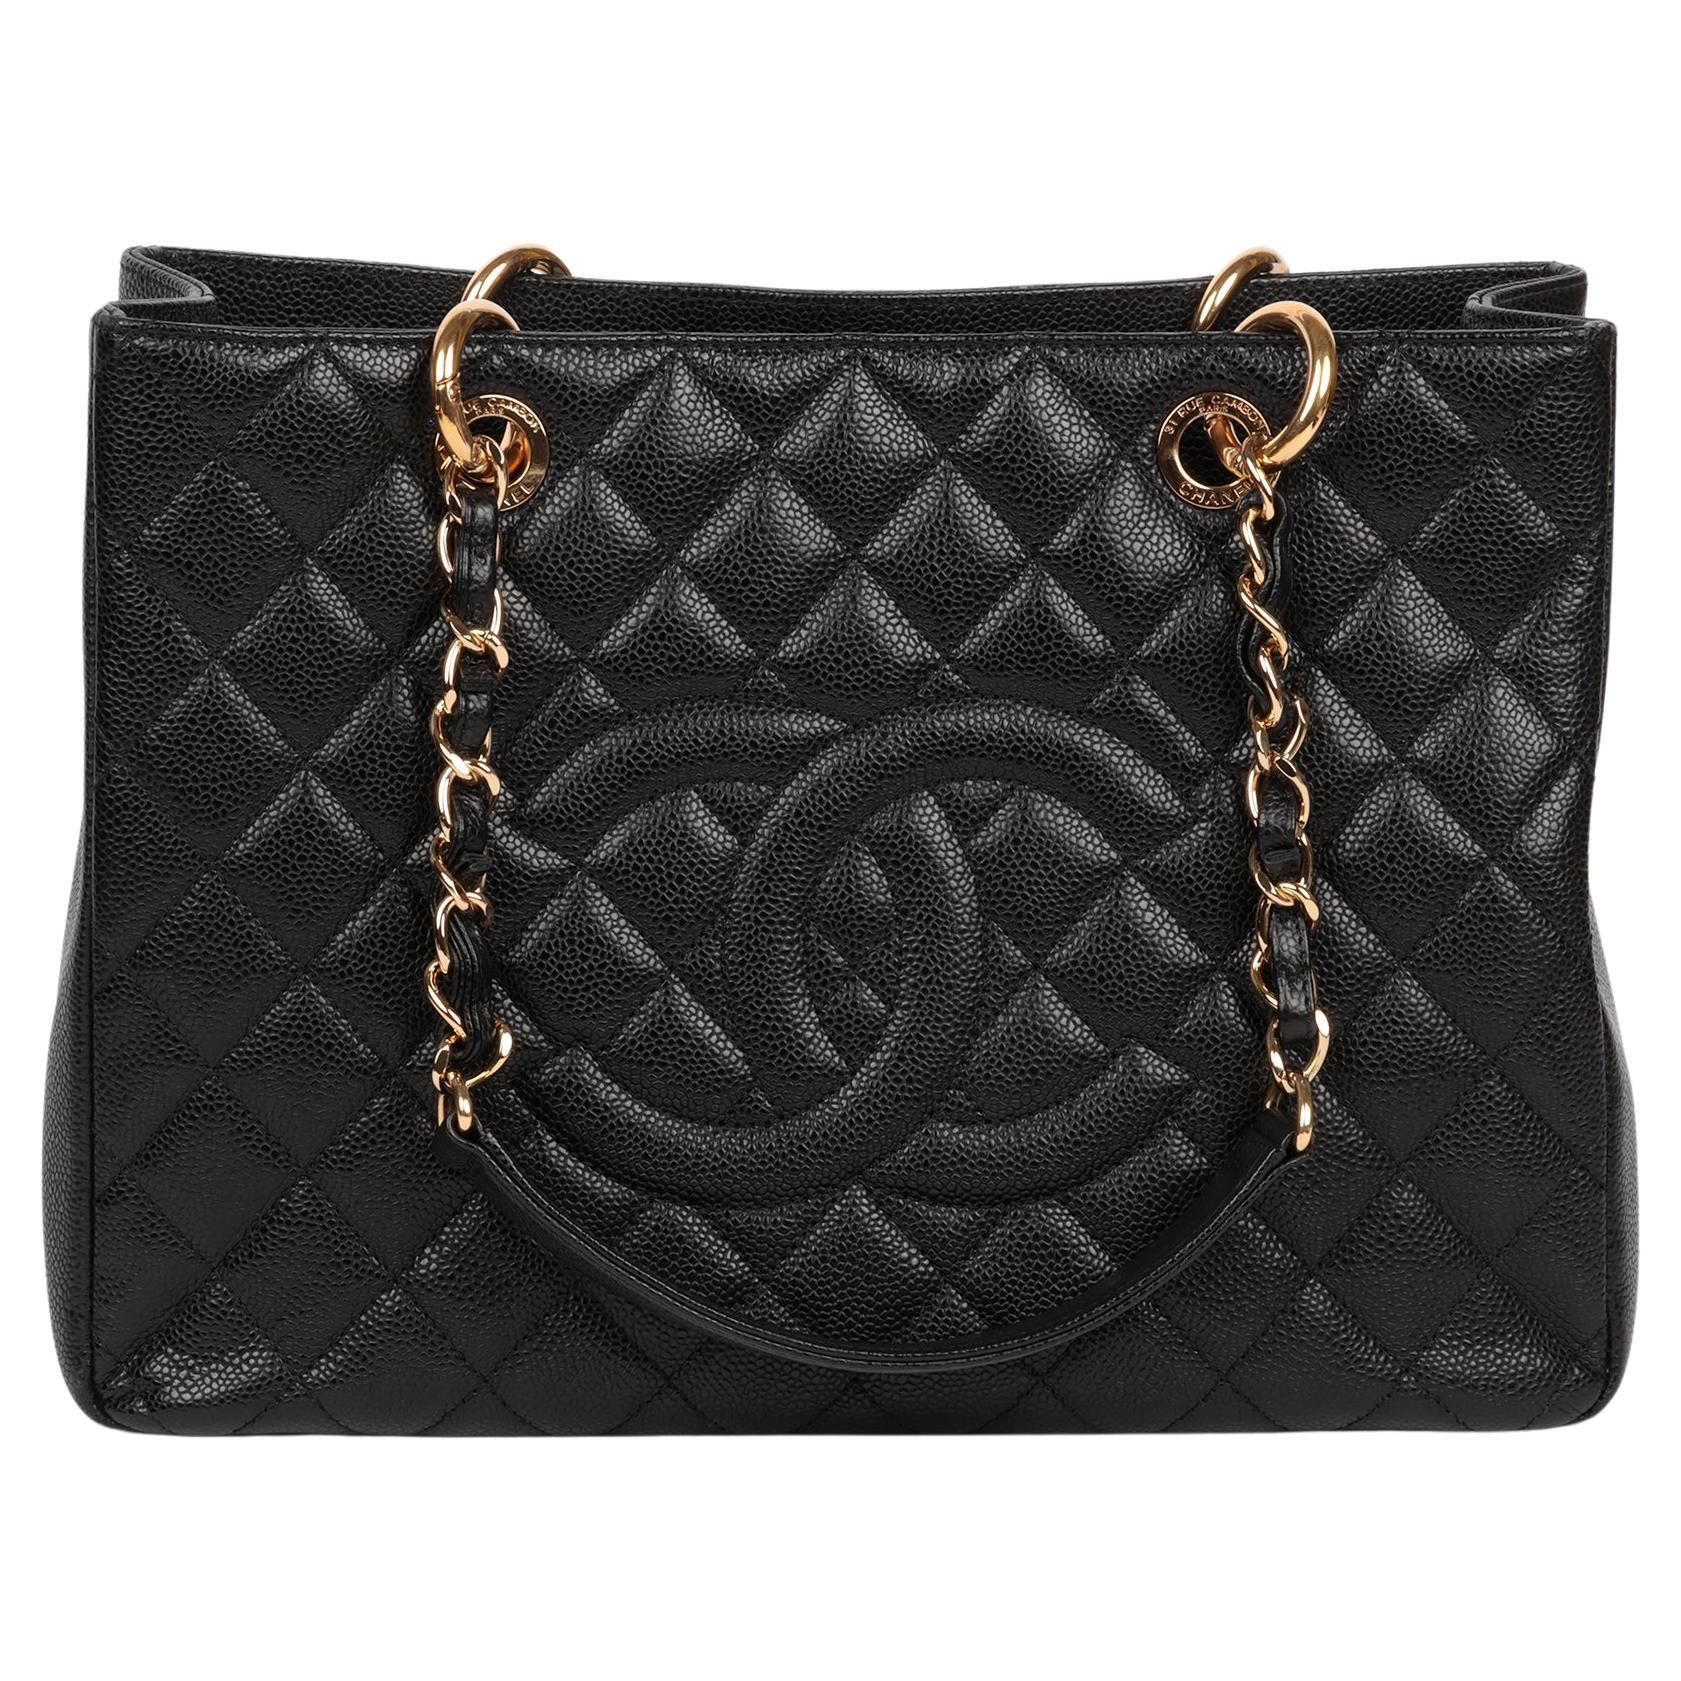 How to remove creases from Chanel bag?